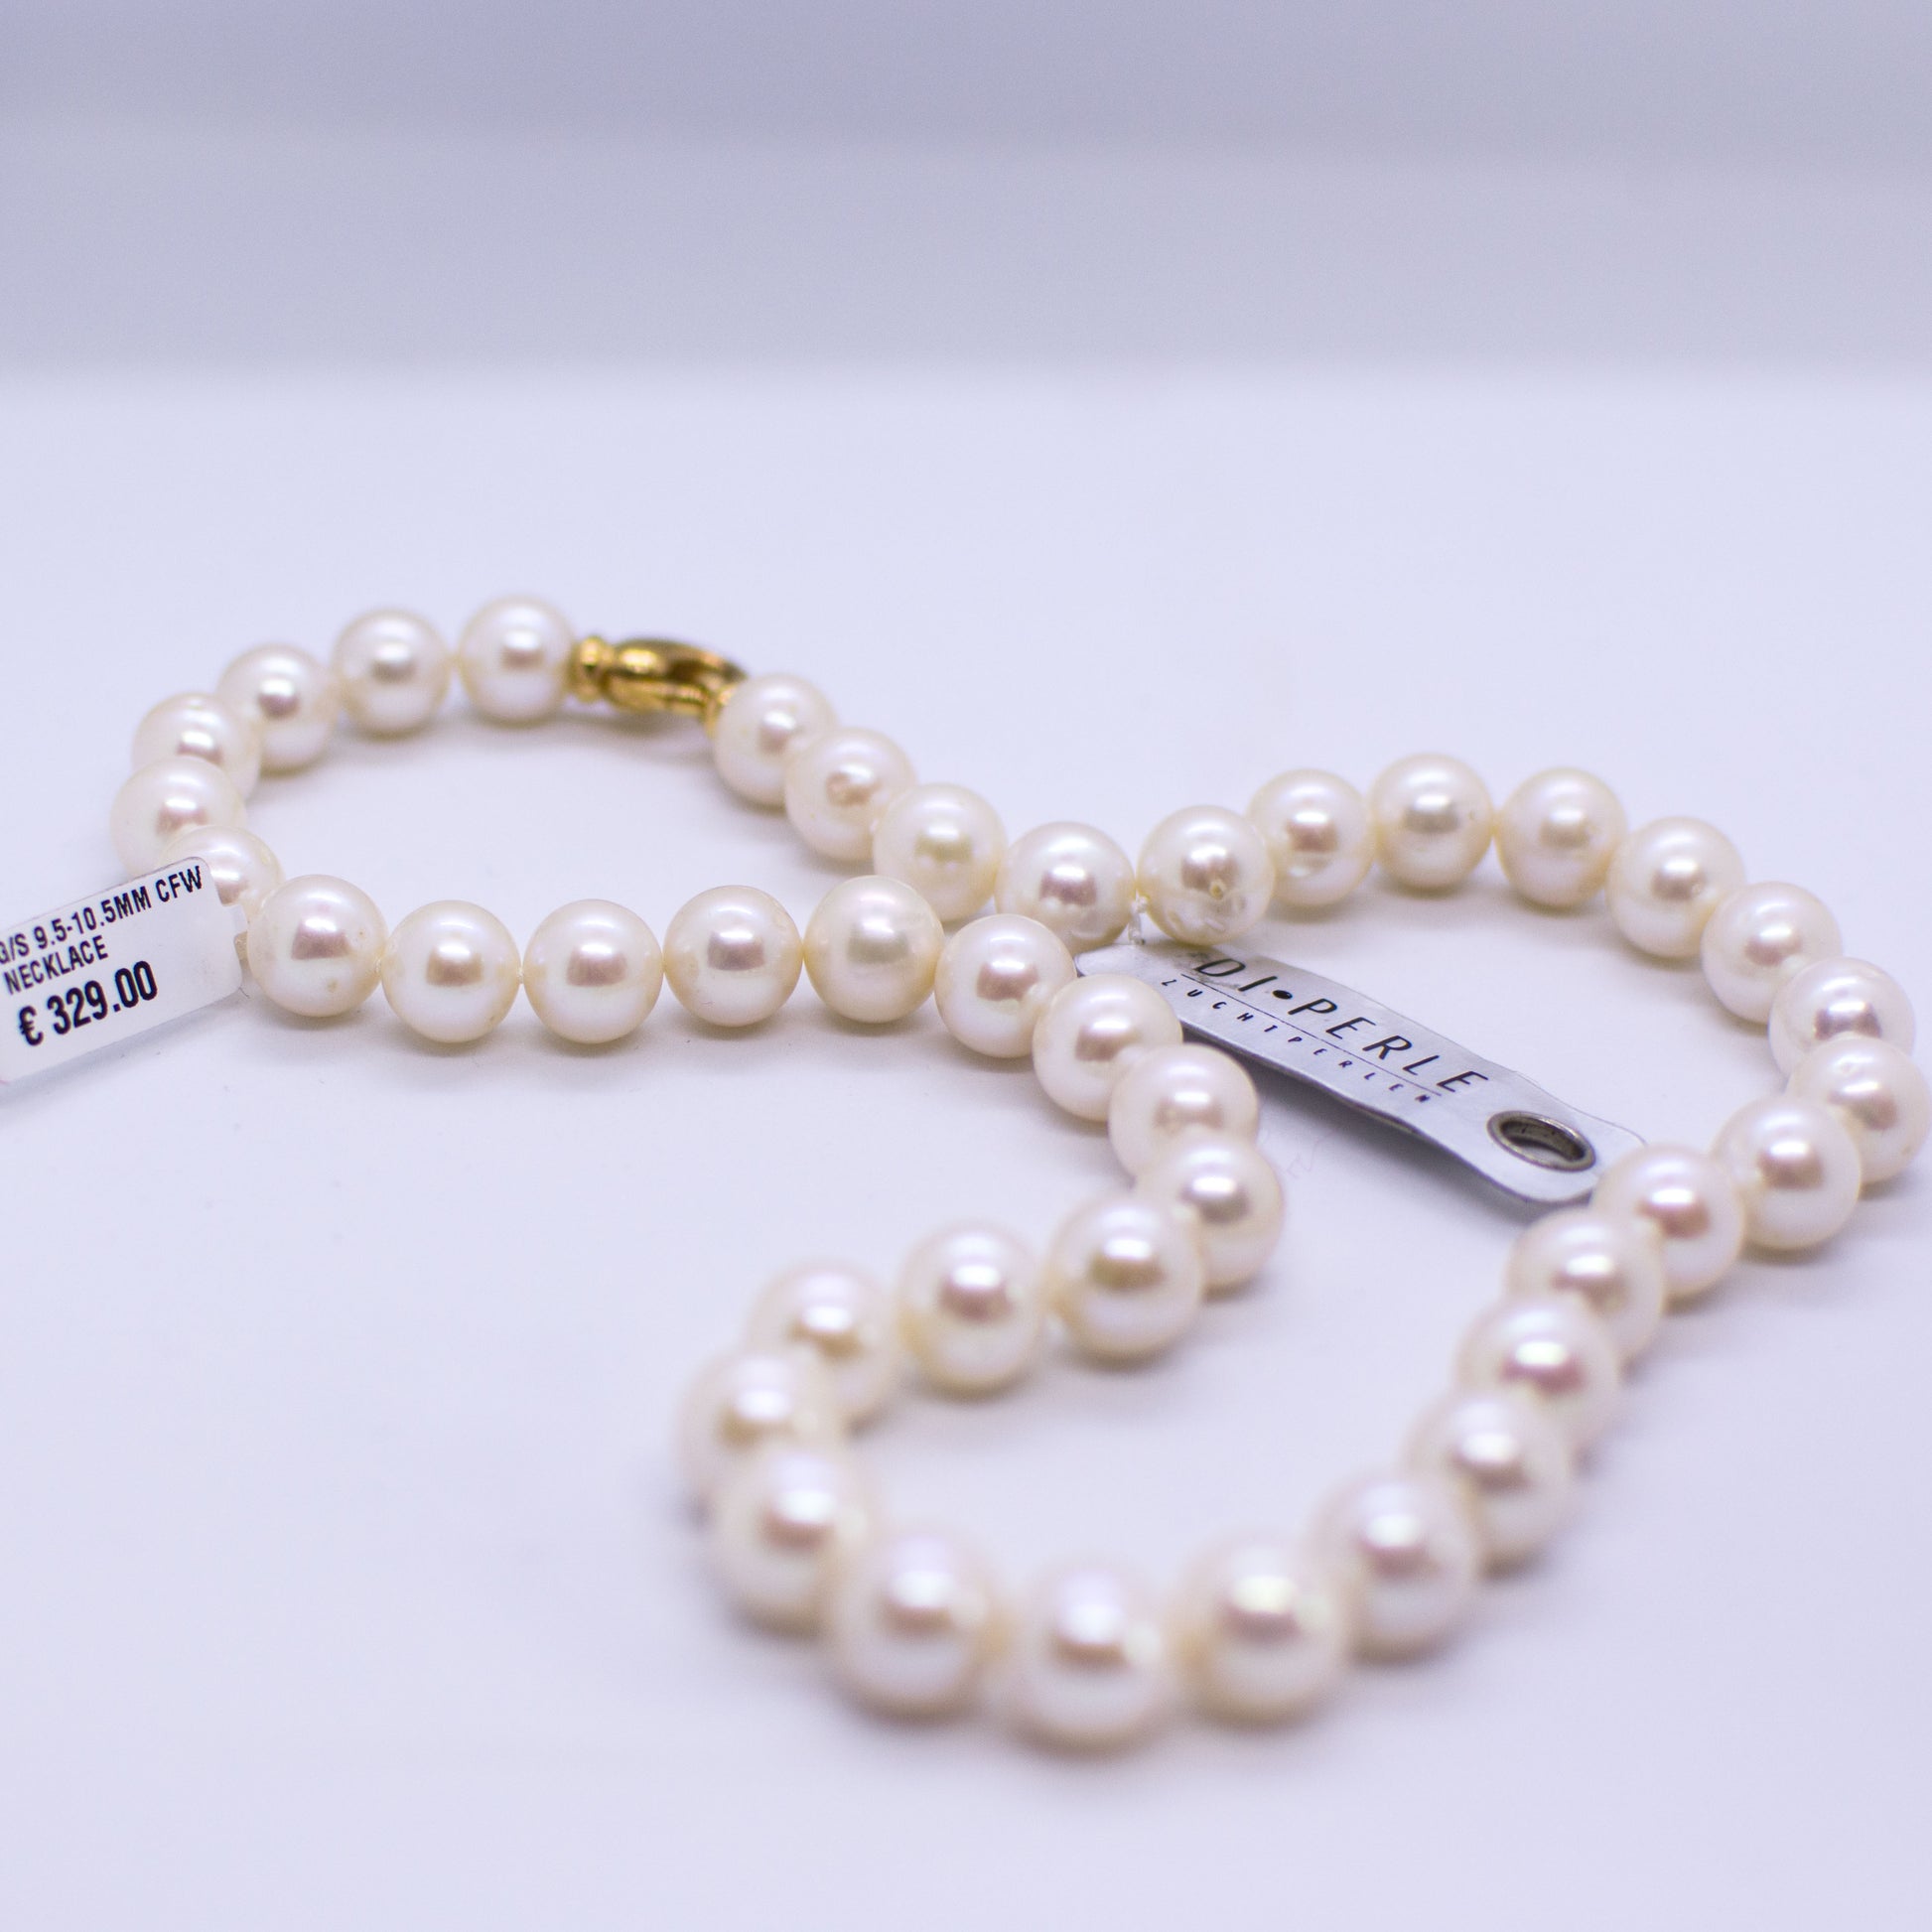 Cultured Freshwater Pearl Necklace - 10mm|45cm - John Ross Jewellers